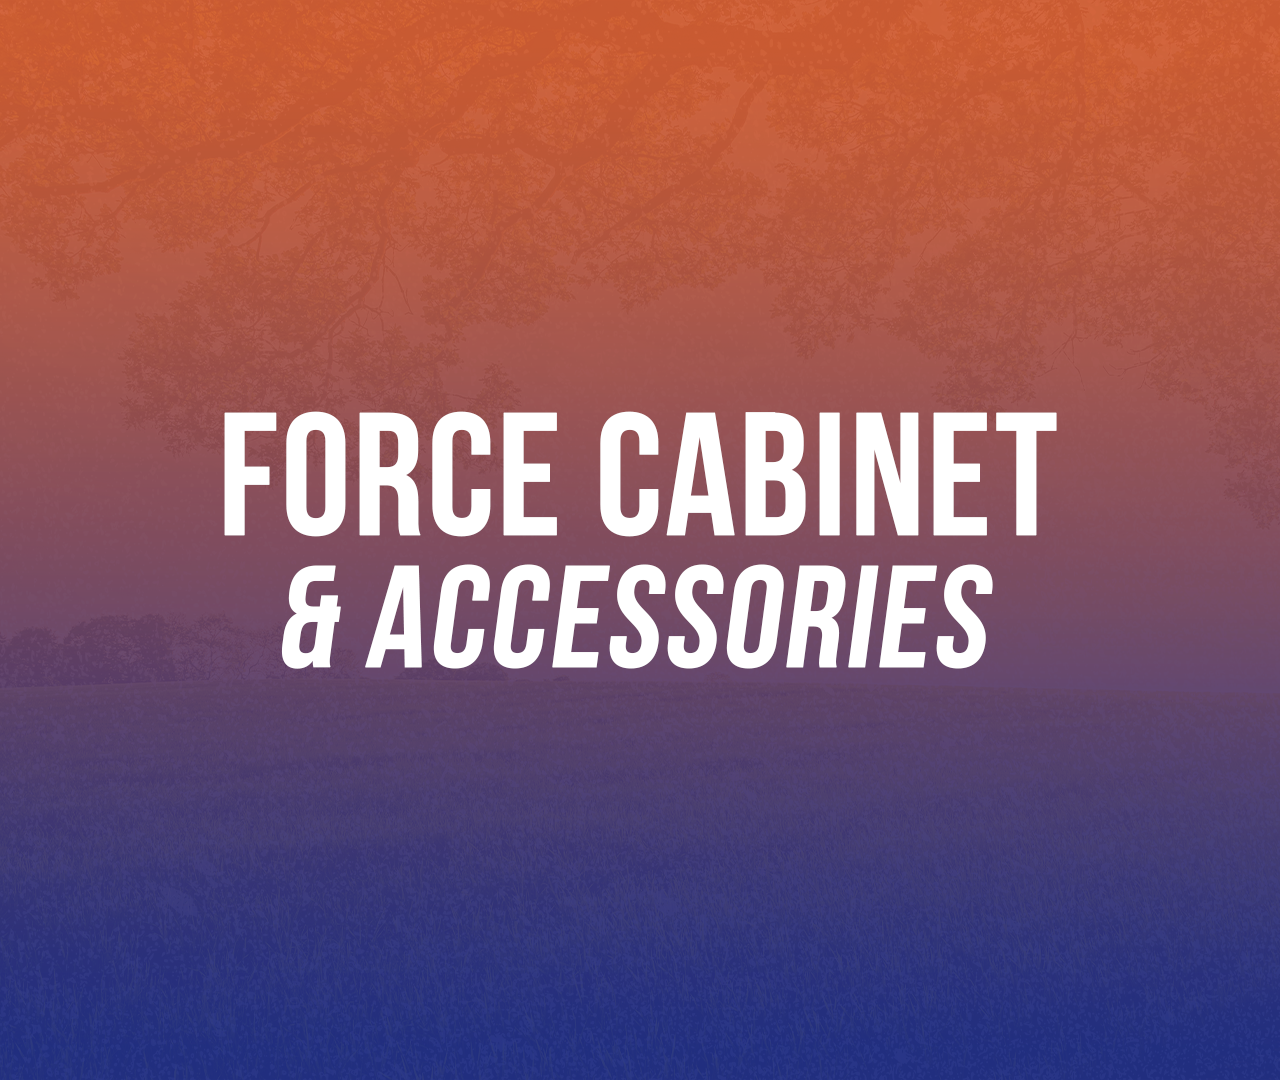 Force Cabinet & Accessories